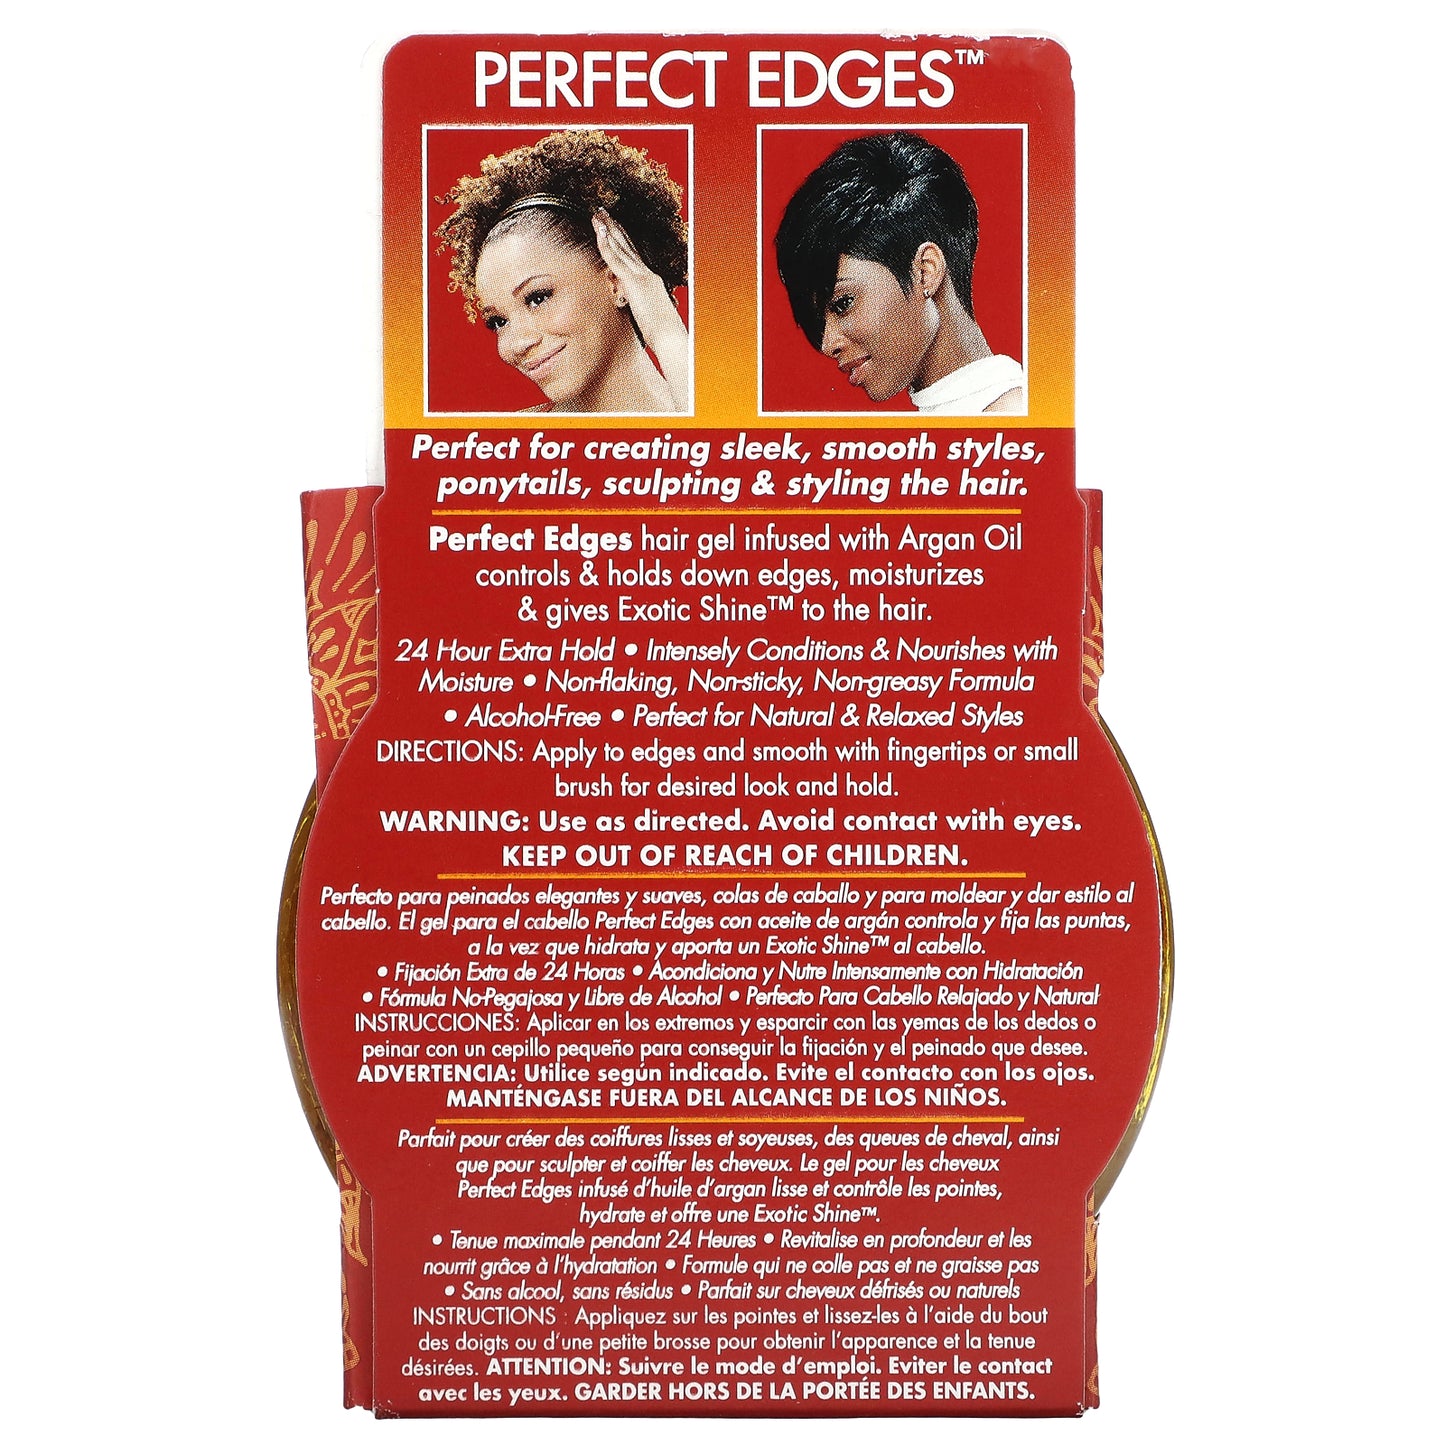 Creme Of Nature, Argan Oil From Morocco, Perfect Edges, Hair Gel, 2.25 oz (63.7 g)